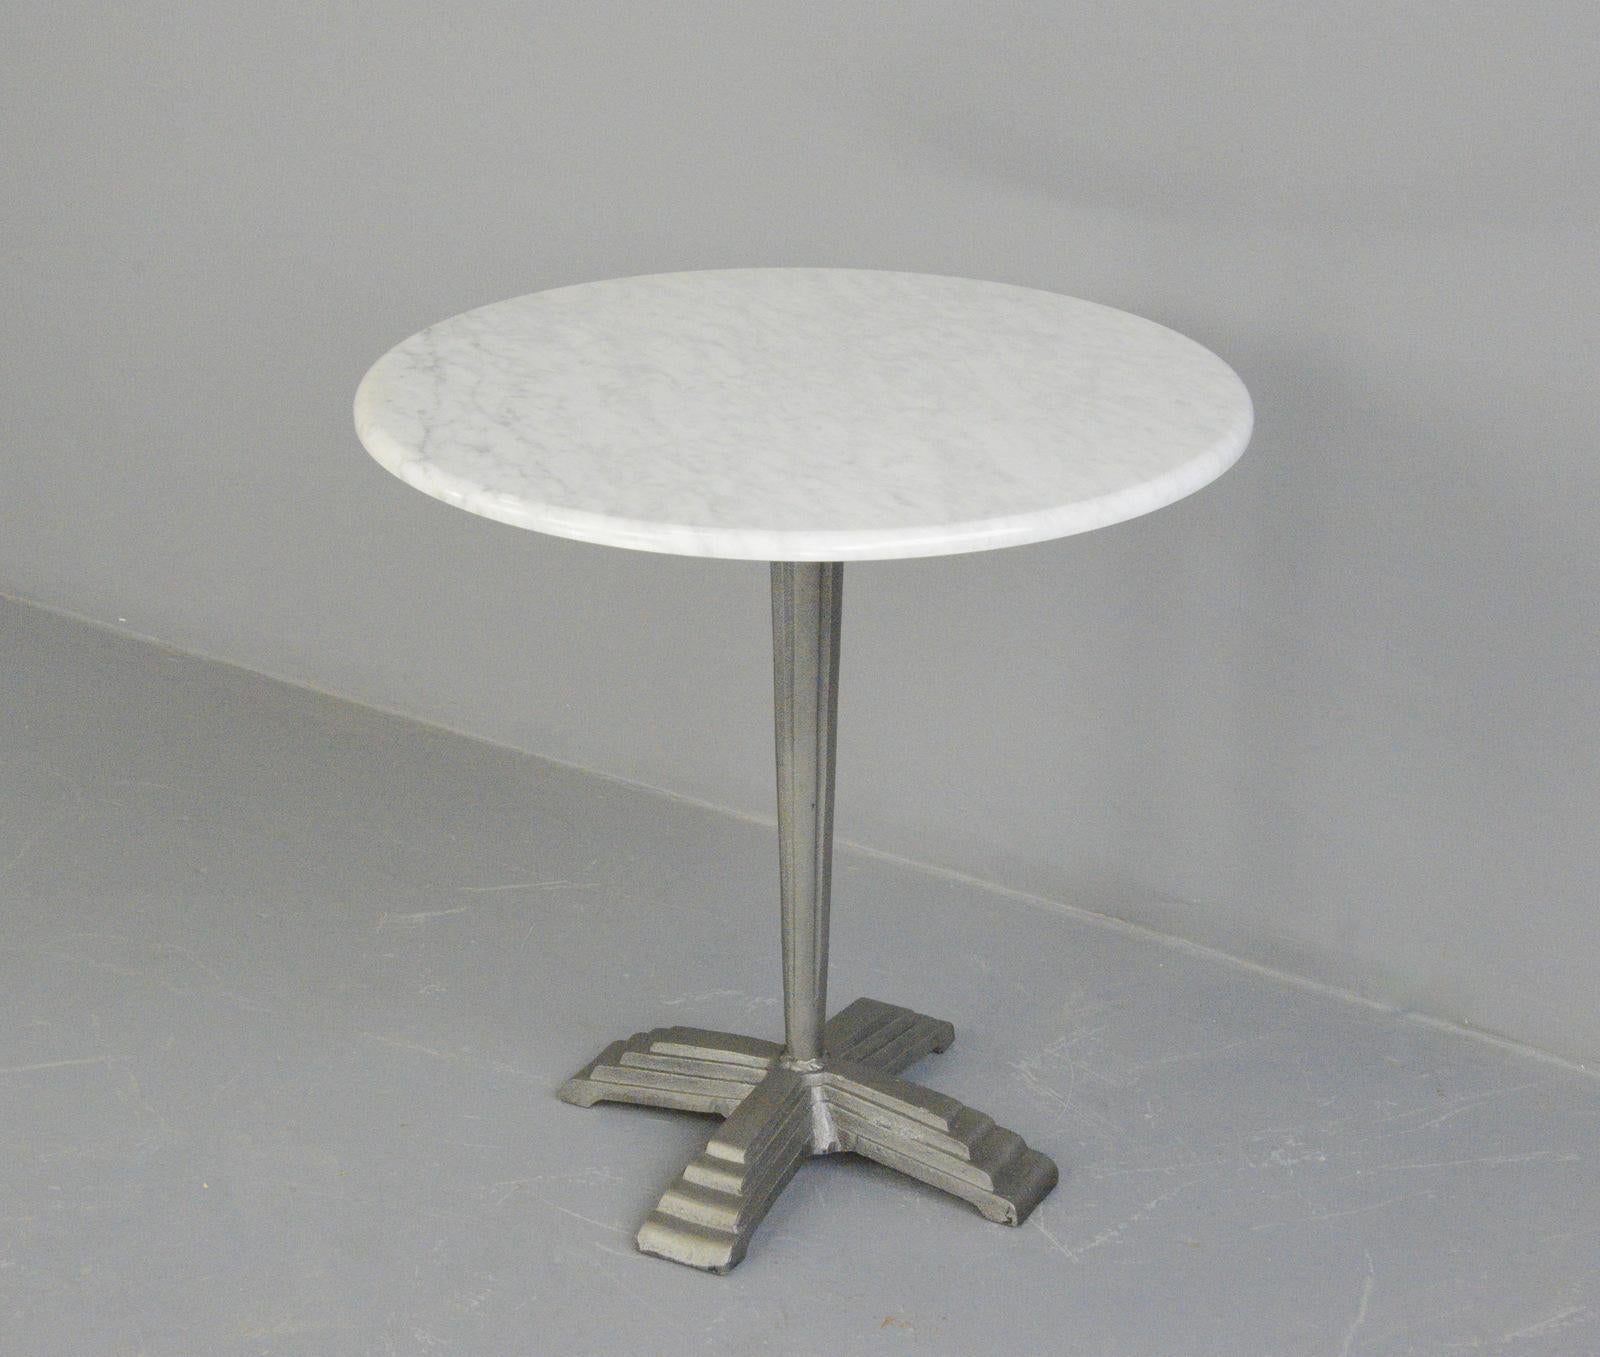 Cast Iron & Marble Art Deco Cafe Tables, Circa 1930s For Sale 1